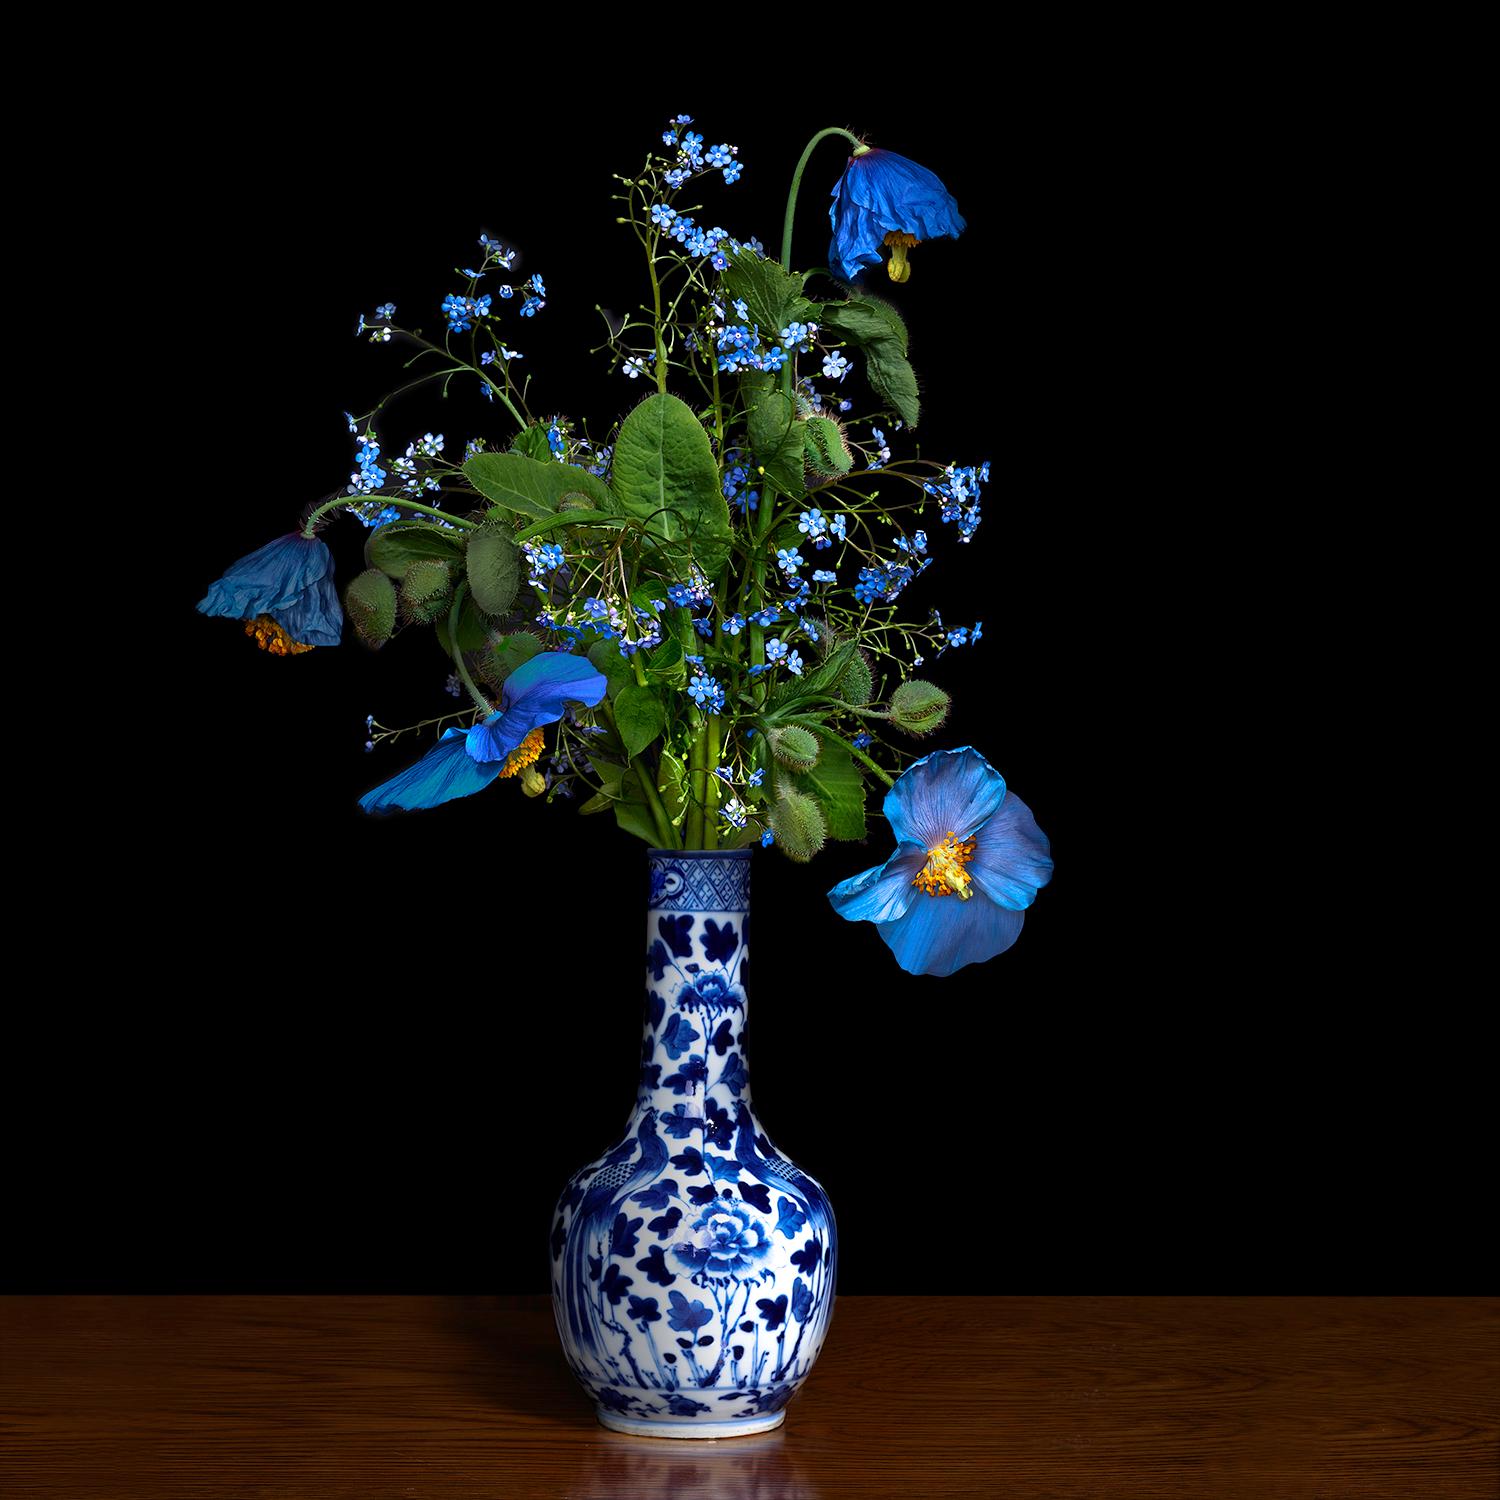 T.M. Glass Still-Life Photograph - Blue Poppy in a Blue and White Chinese Vase